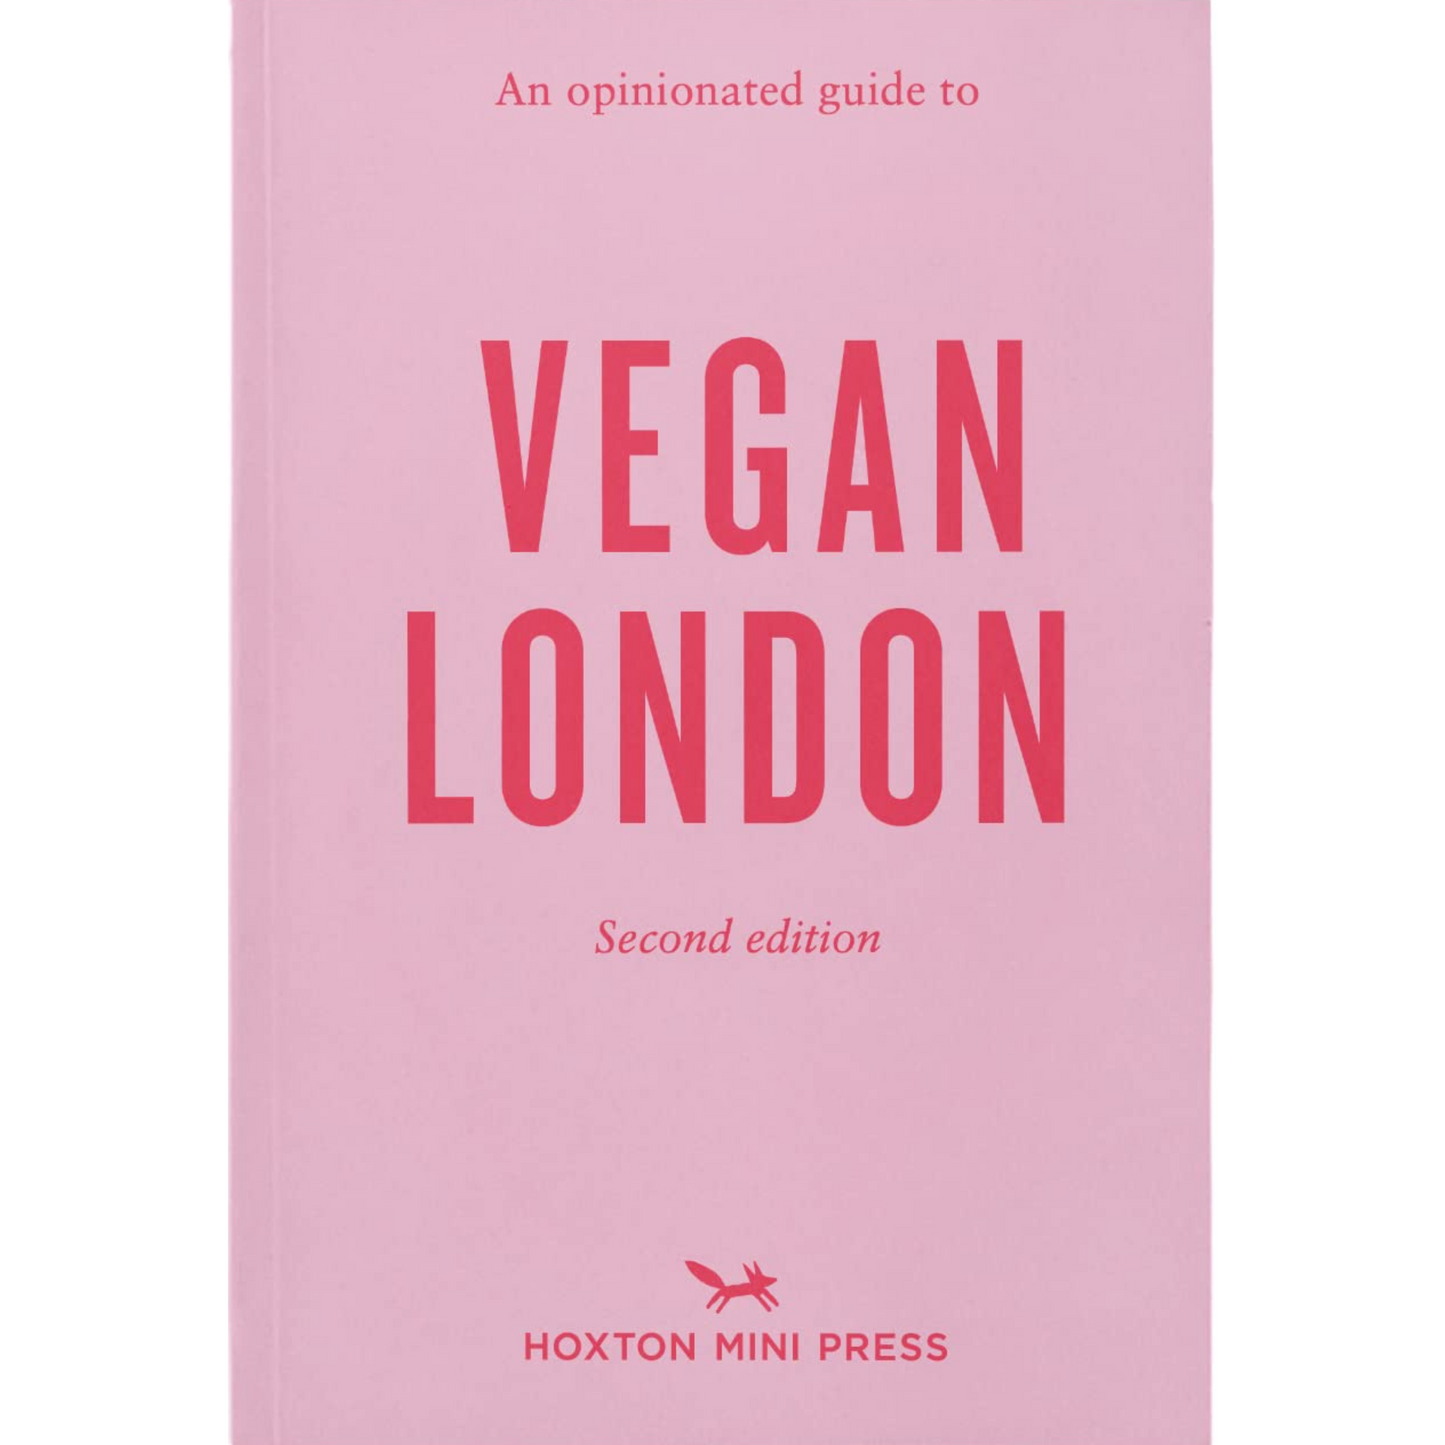 An Opinionated Guide to Vegan London: 2nd Edition